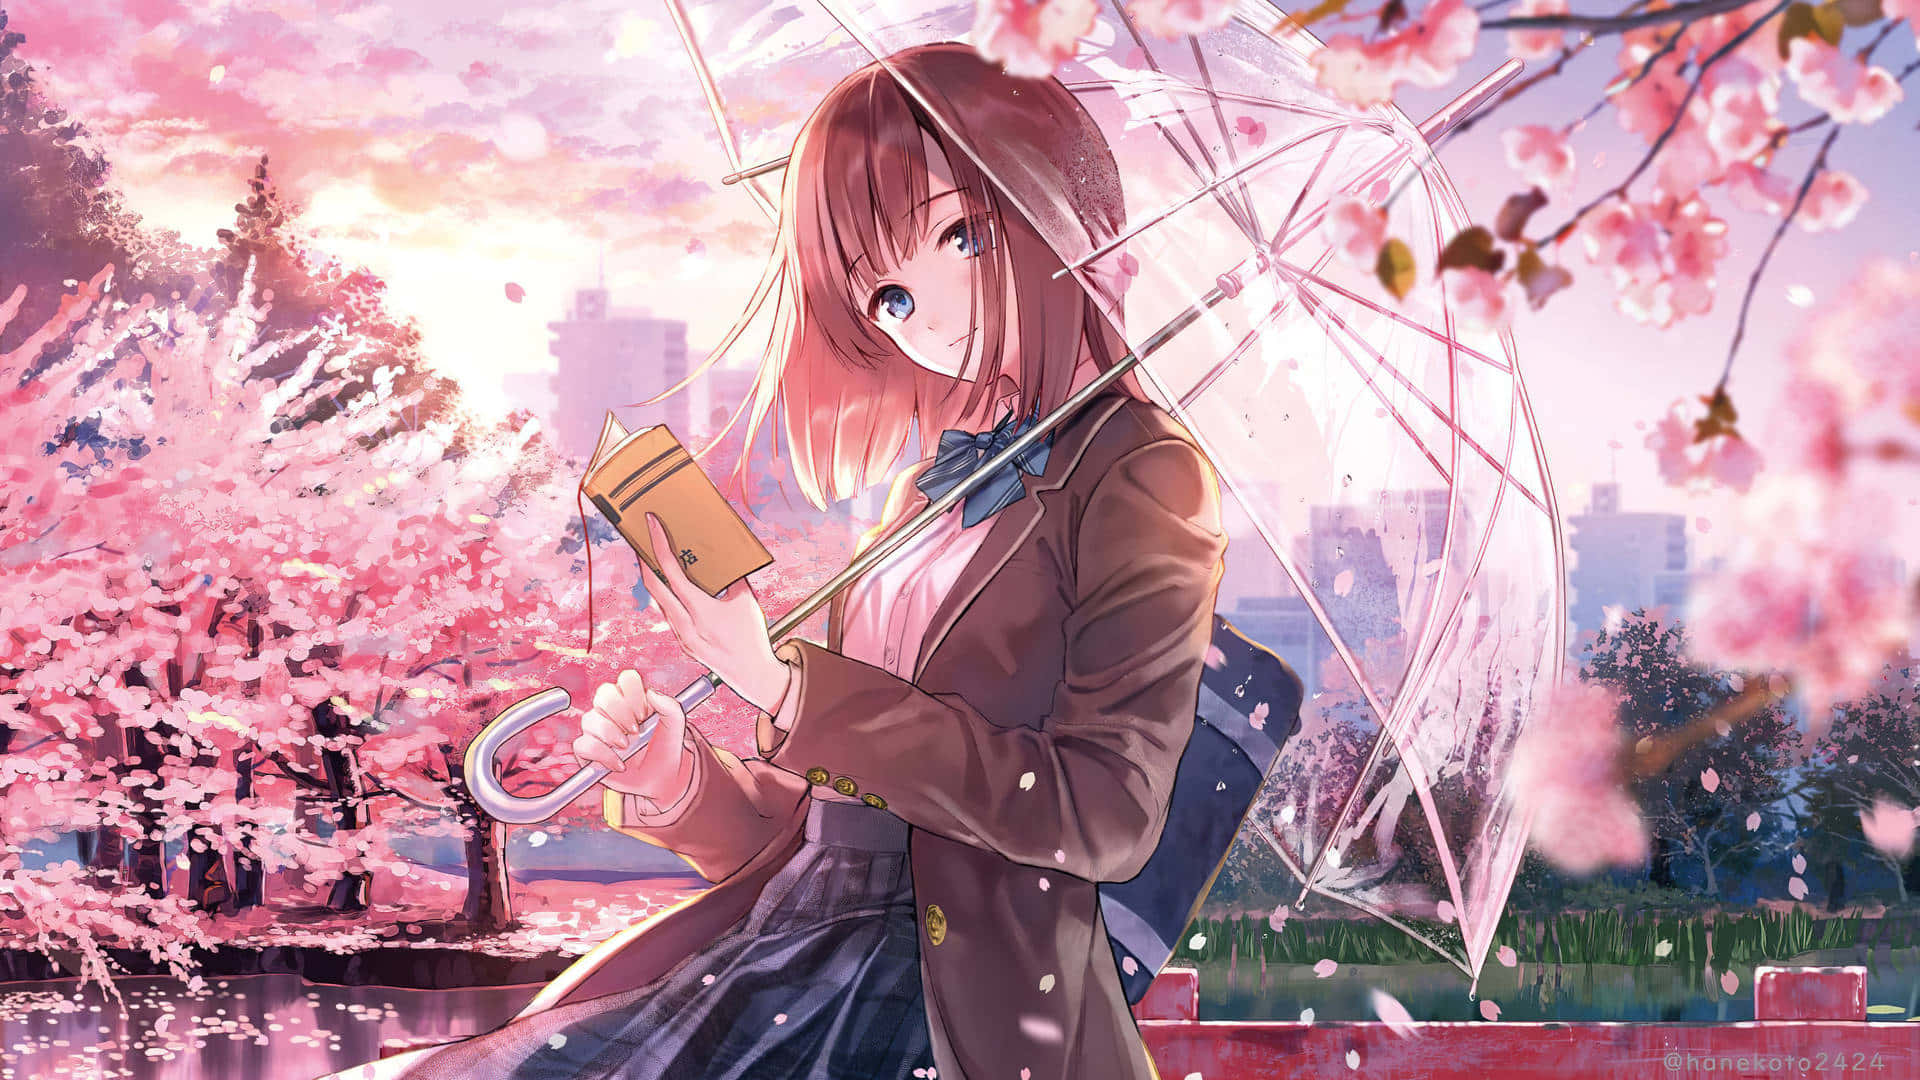 A young Anime Girl stands in a vibrant city street scene.